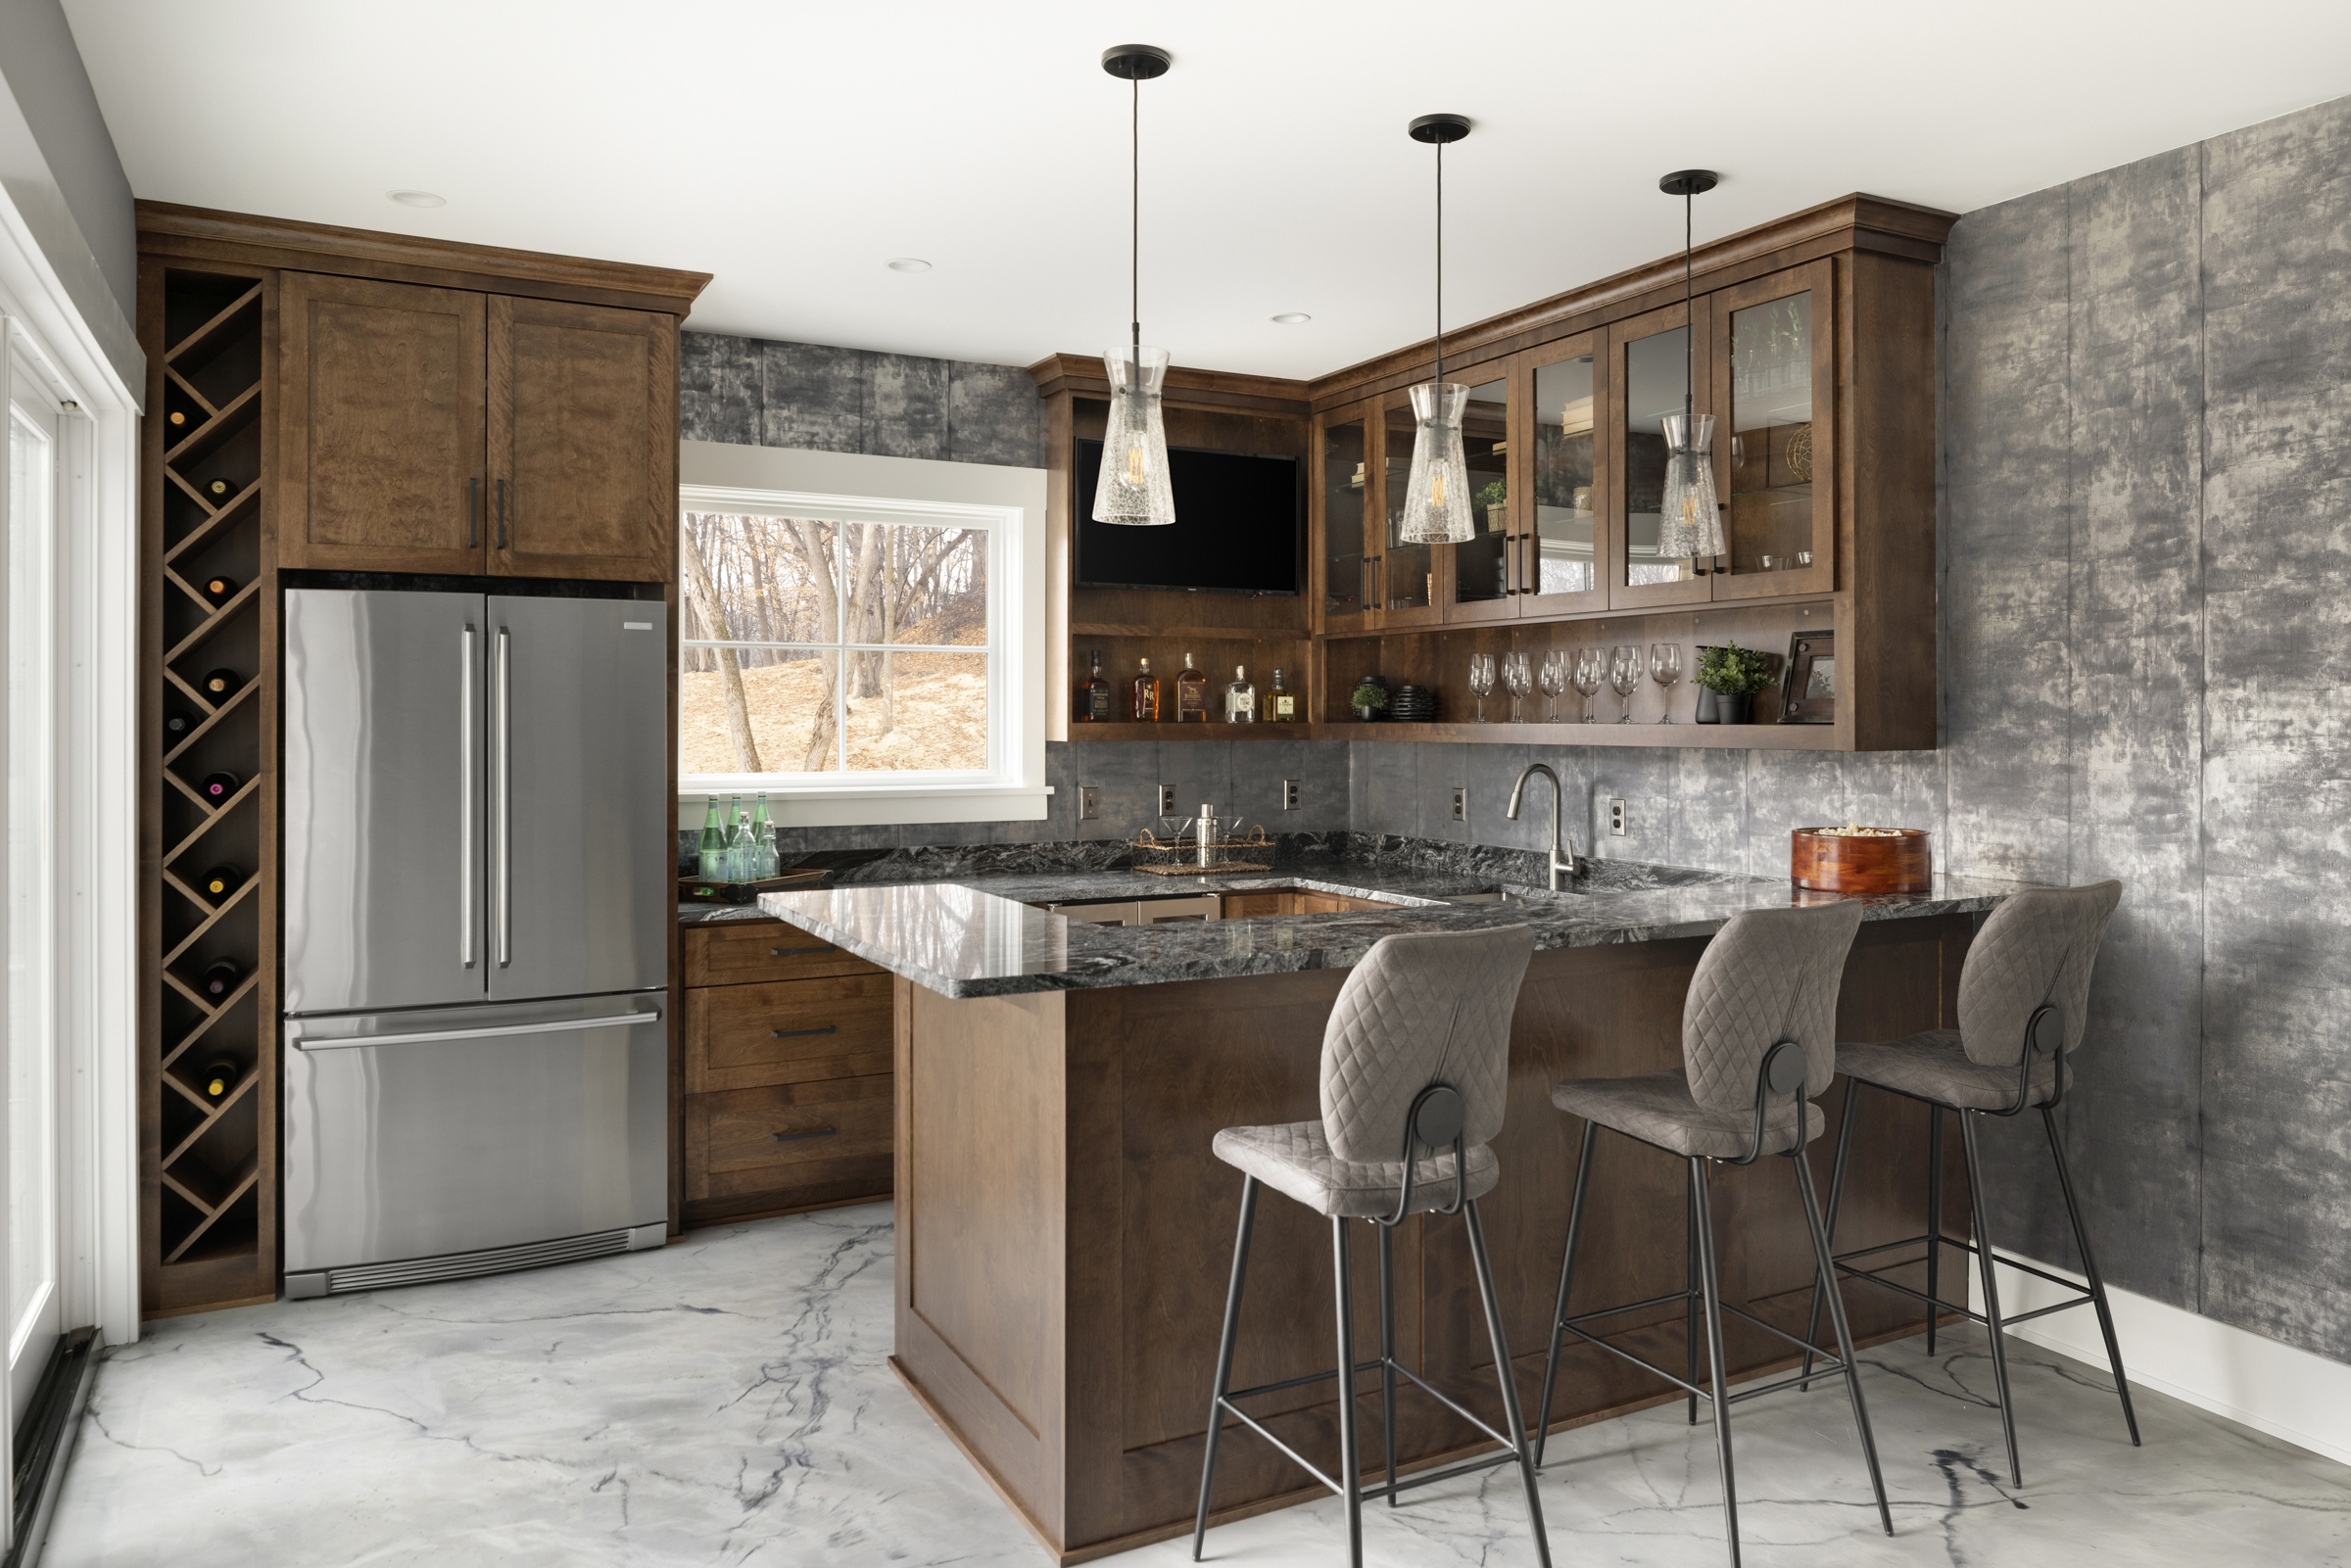 lower level bar in the corner of the room with wood cabinetry, a full sized fridge, a sink, three barstools at the counter, and metallic silver wallpaper on the walls